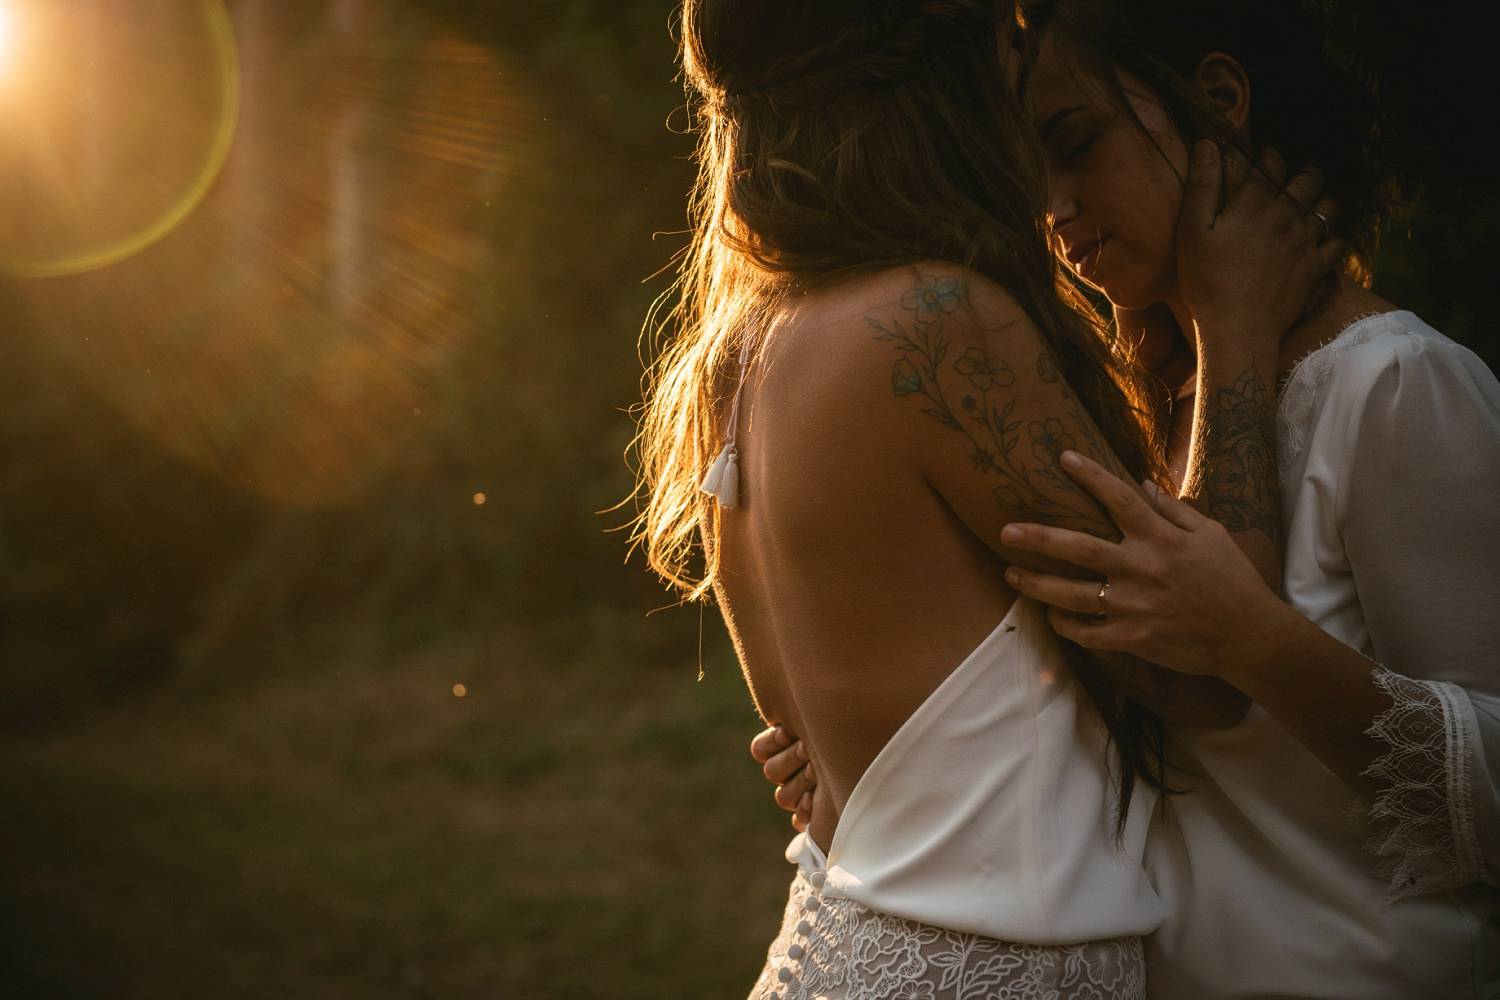 Two brides hold eachother close as the setting sun bathes their skin in warm light.